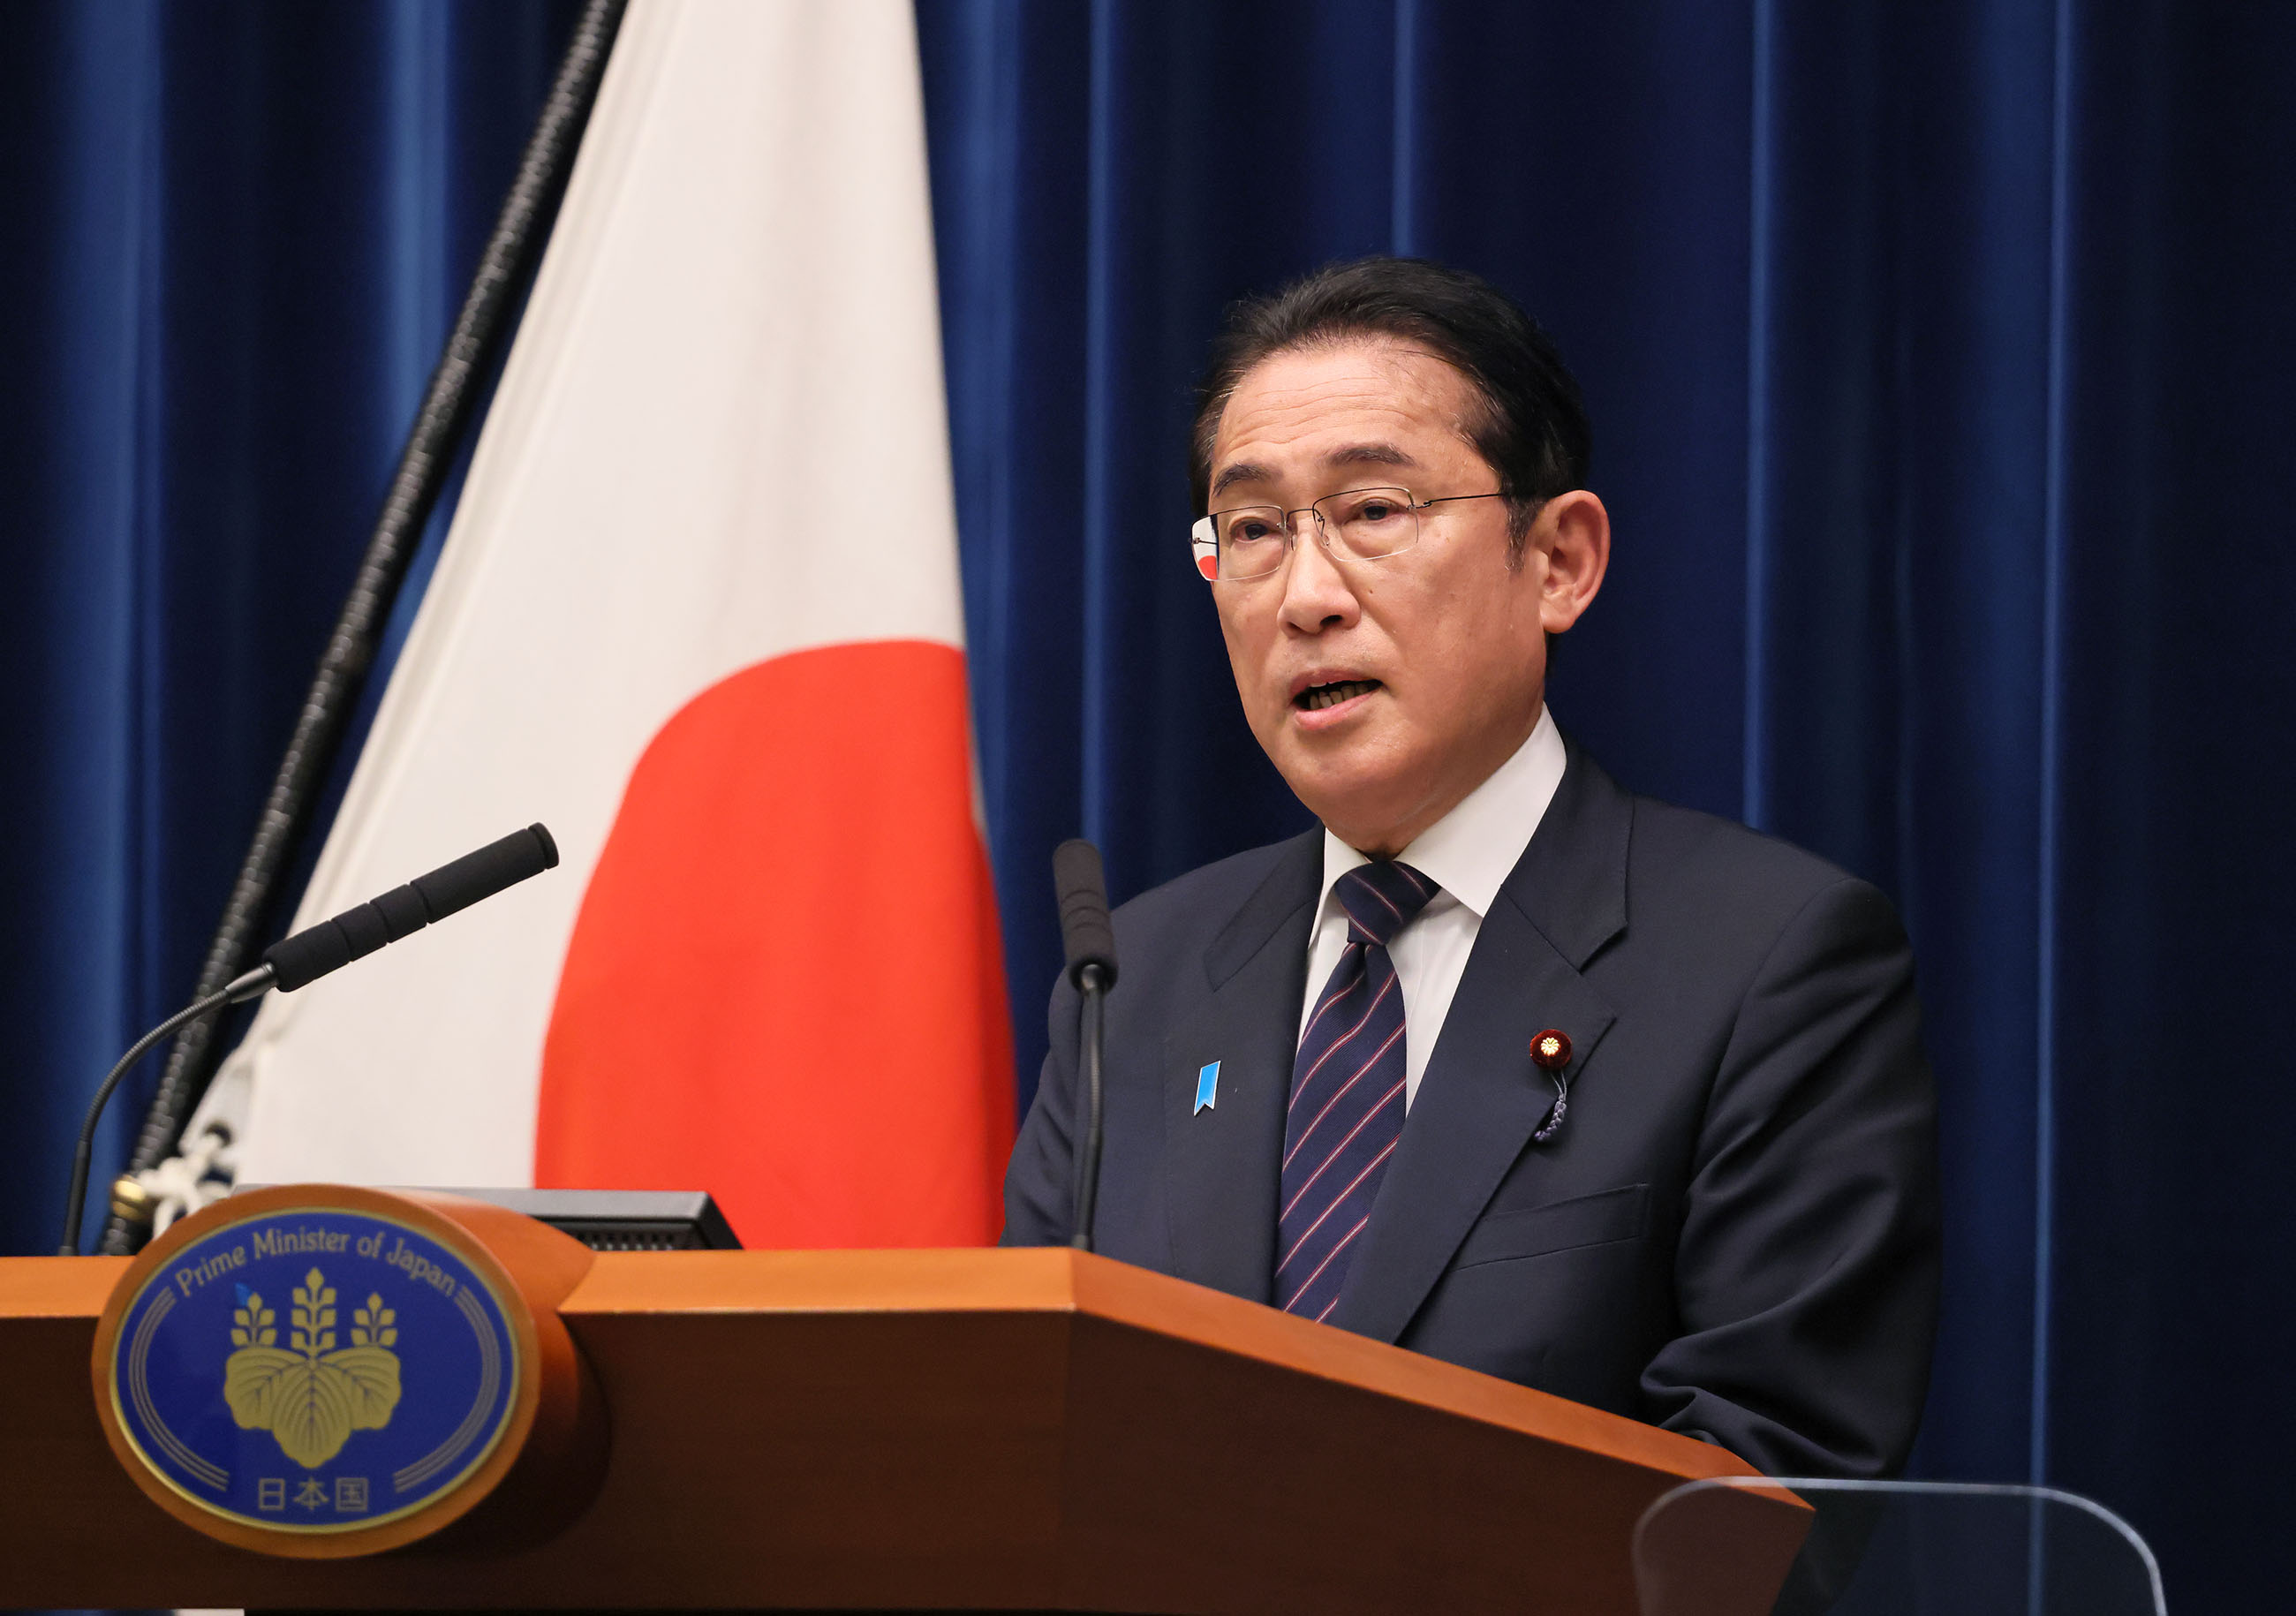 Prime Minister Kishida answering questions from the journalists (3)